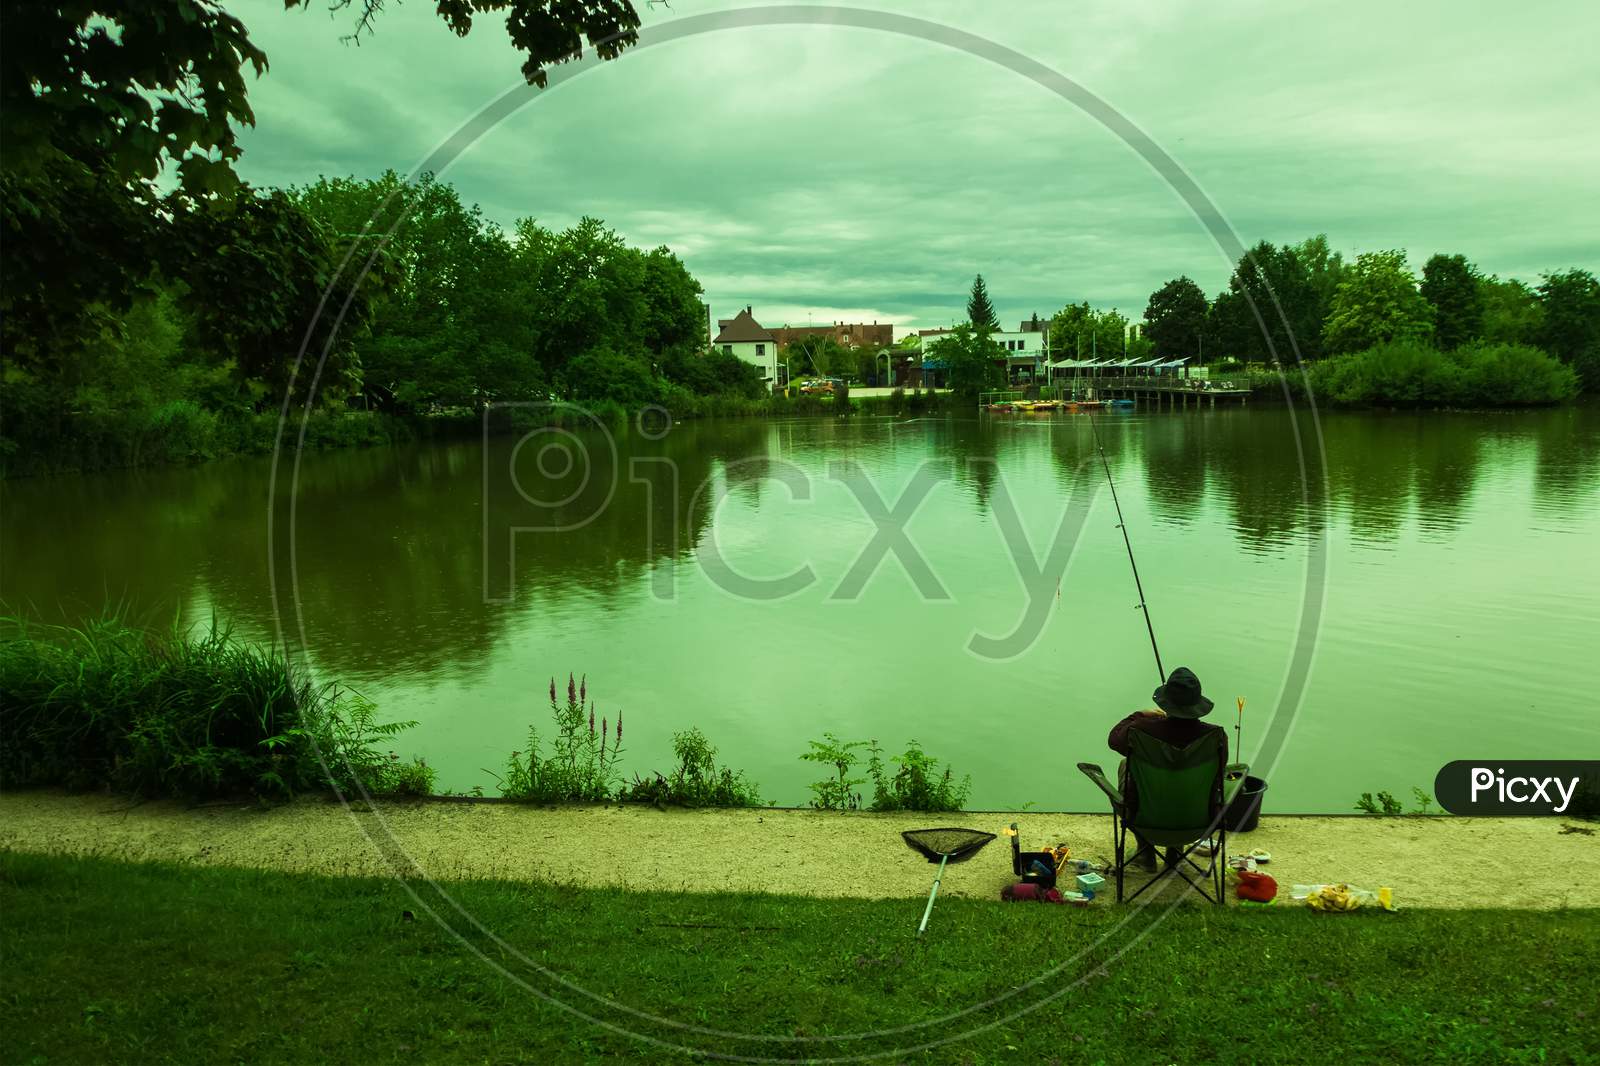 An Angler Was Fishing On A Small Lake On A Cloudy Afternoon